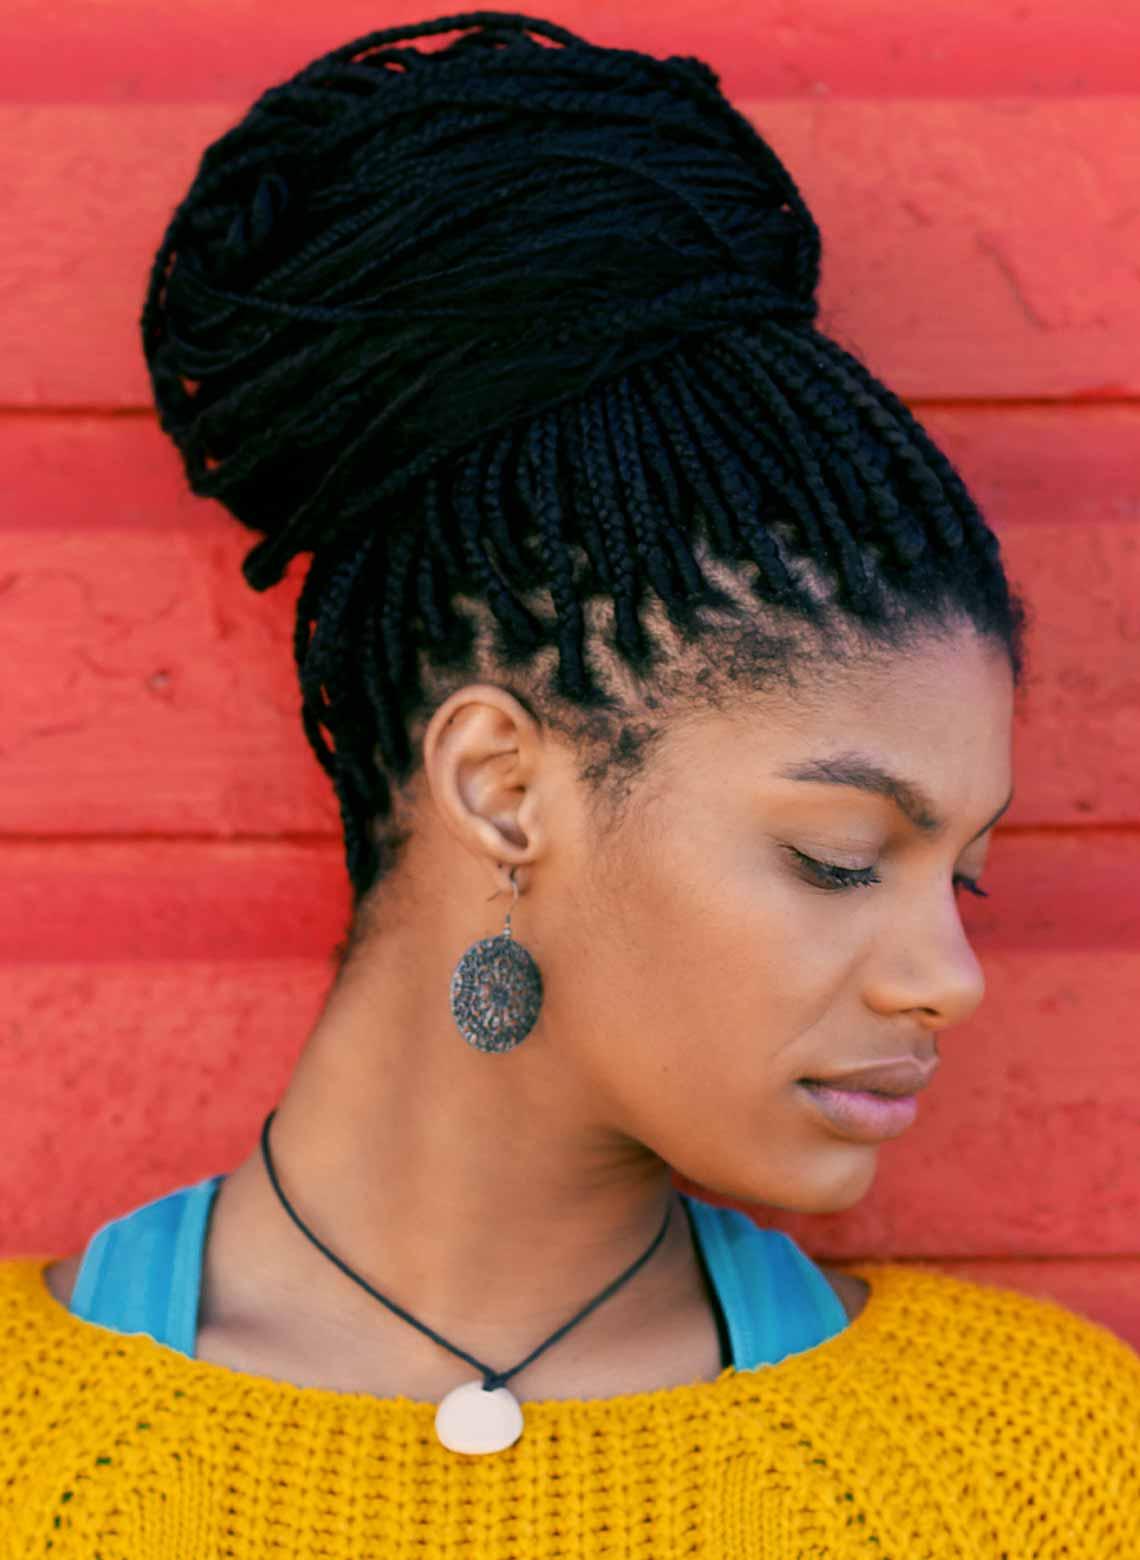 person wearing a yellow knitted top, light blue tank straps showing around the neck, a circular pendant and earrings, and small box braids tied up in a bun